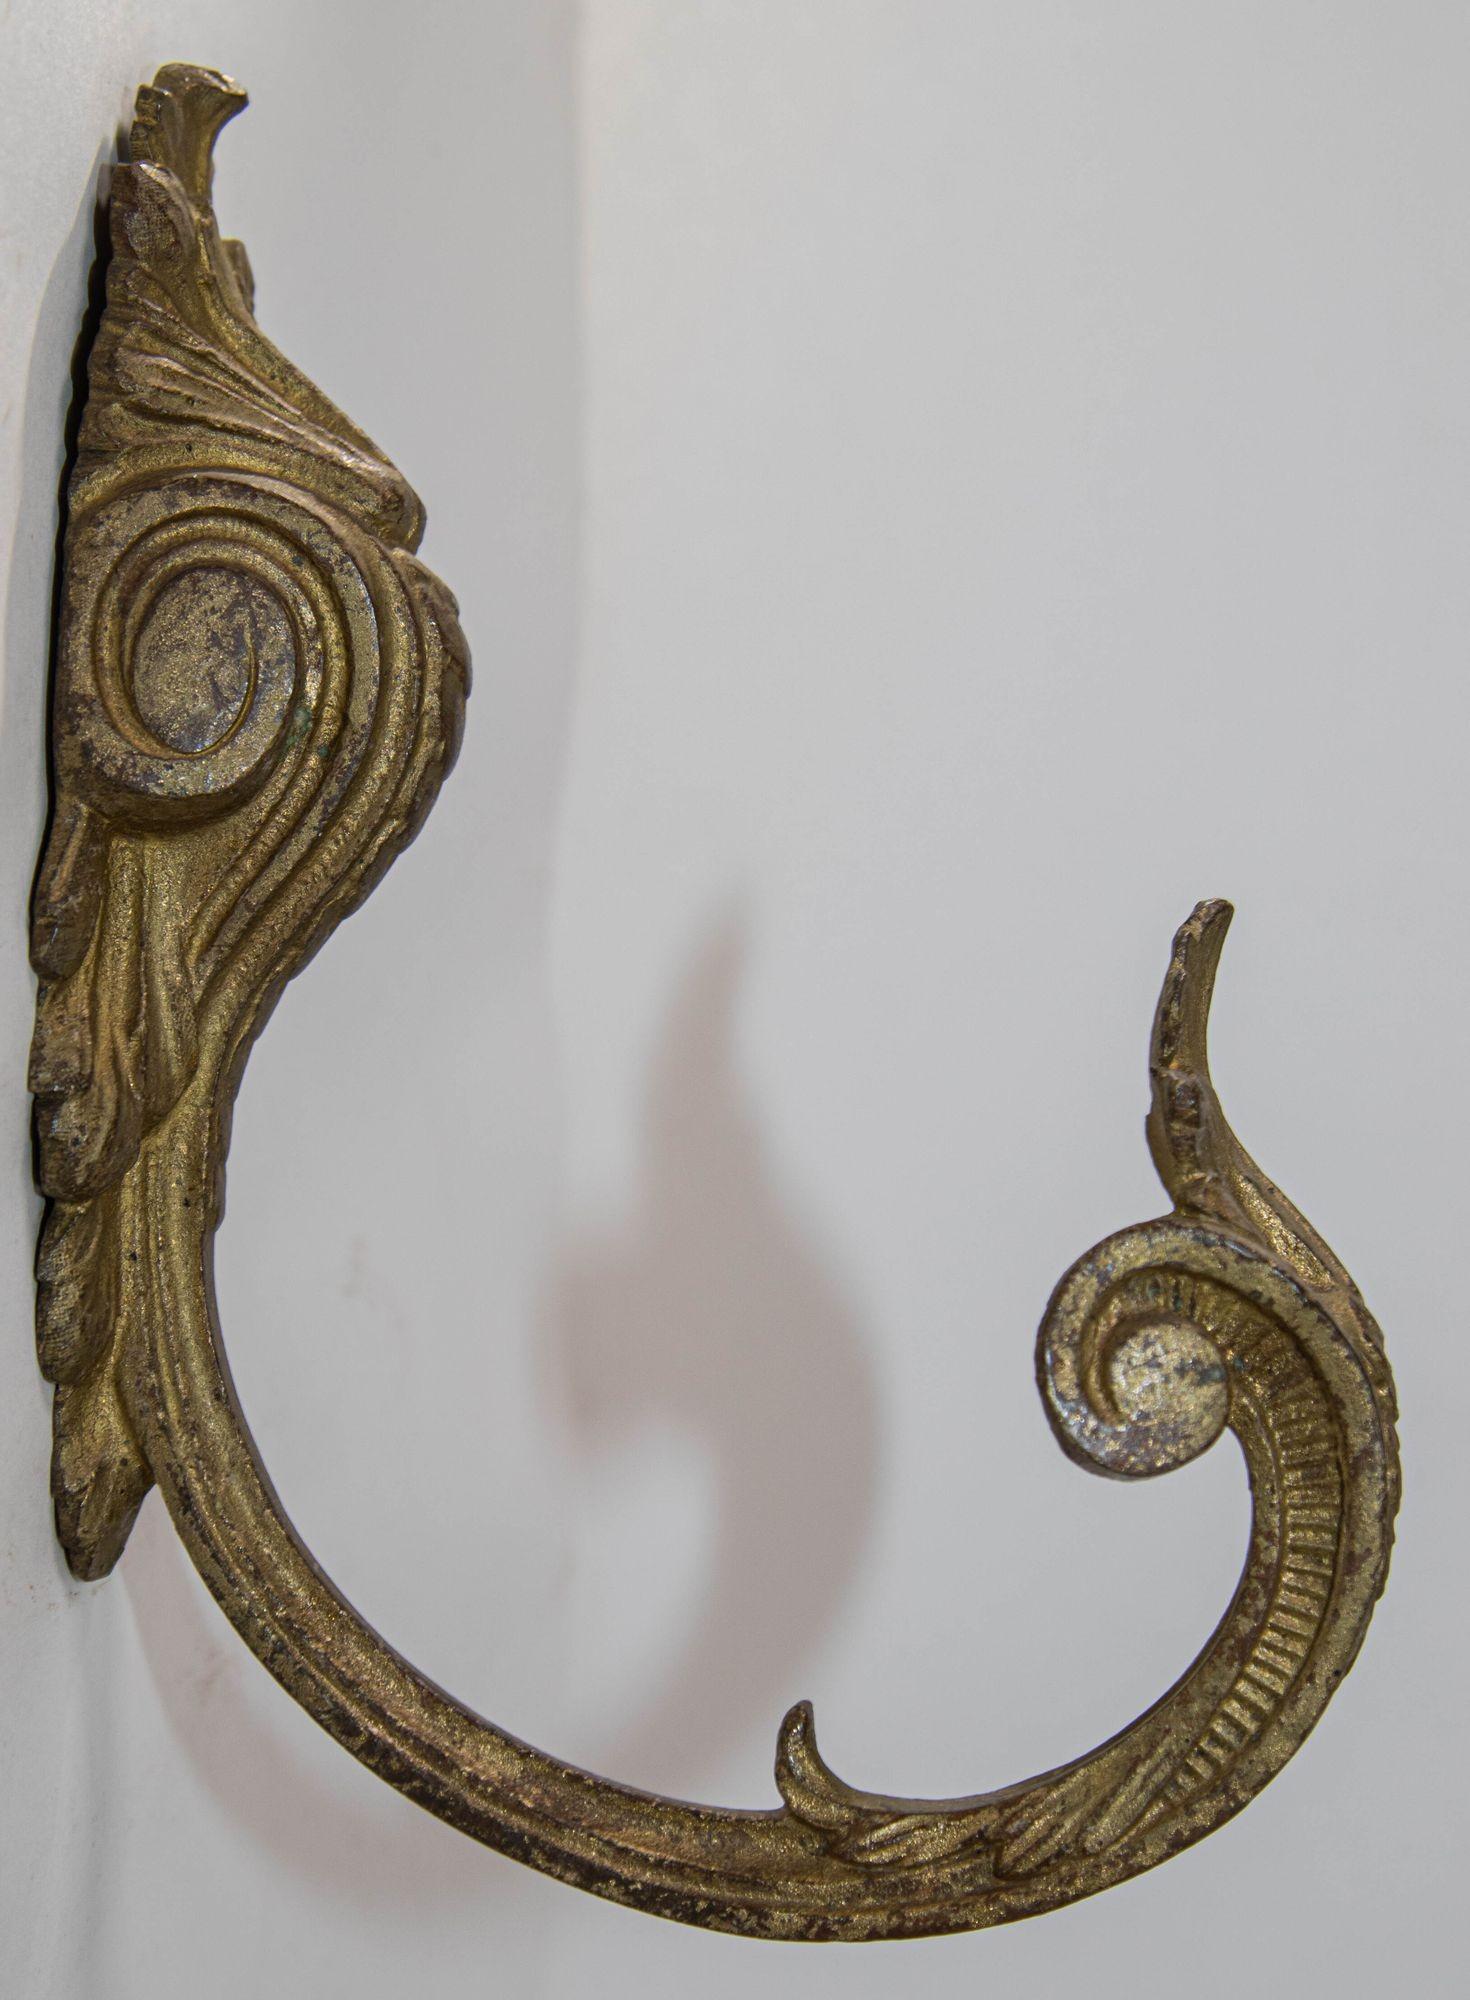 French Pair of Louis XIV Baroque Style Gilt Bronze Curtain Hooks or Tie Backs Set of 2 For Sale